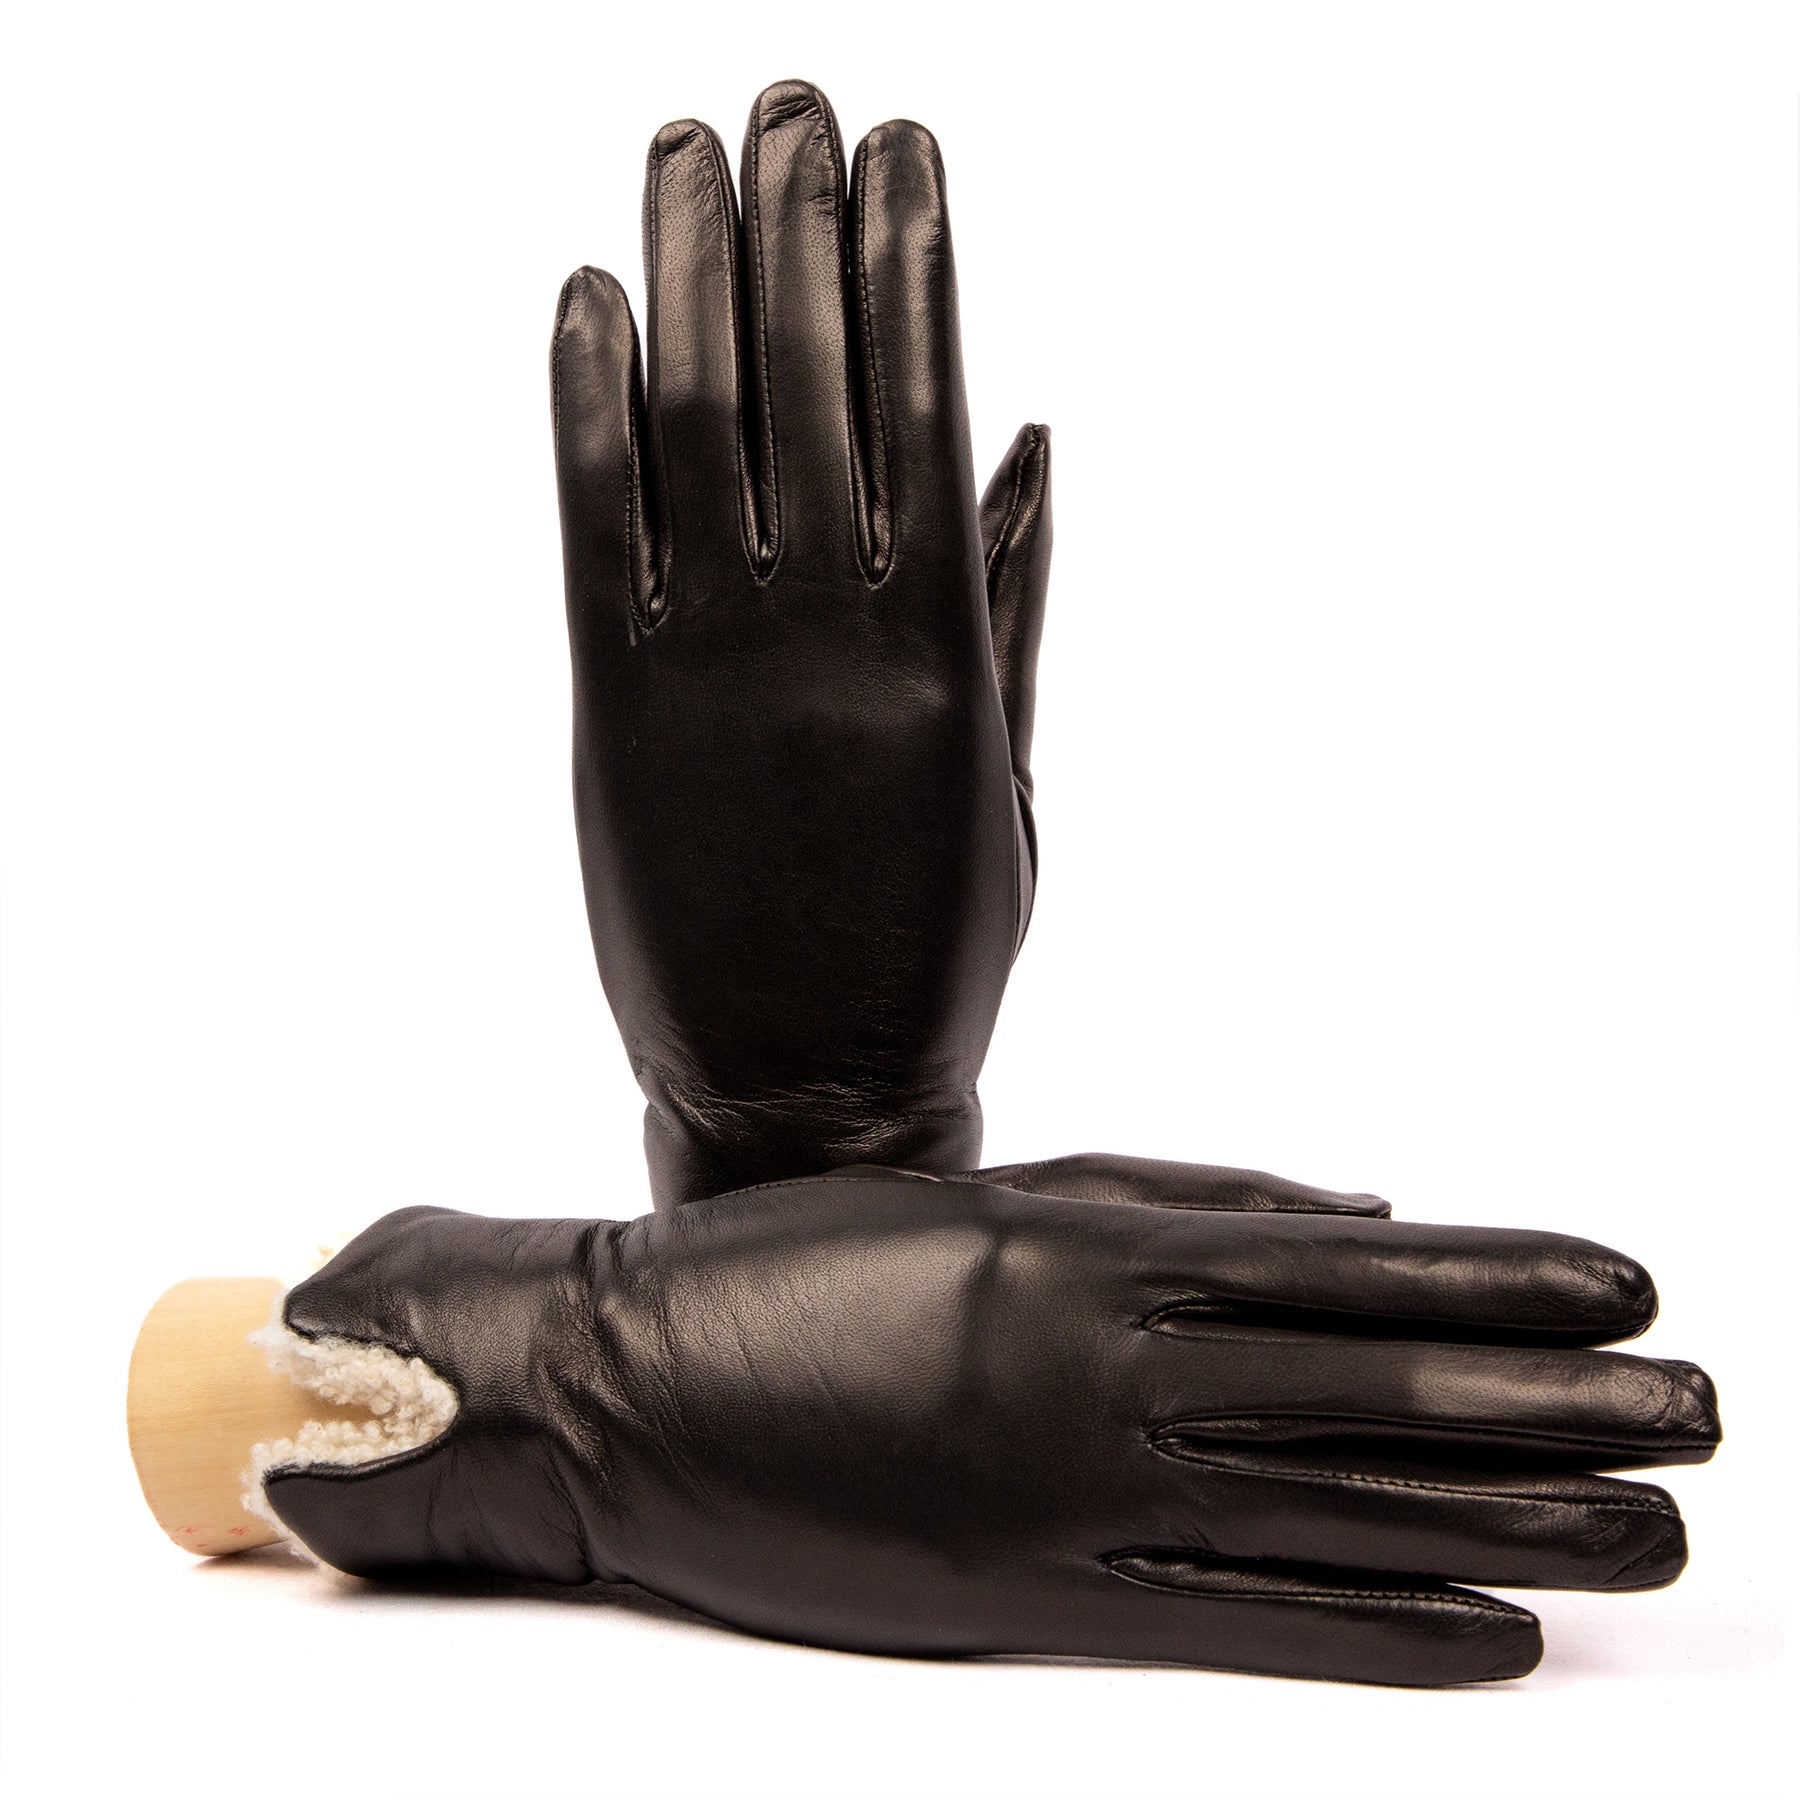 Women's black nappa leather gloves with shearling cuff